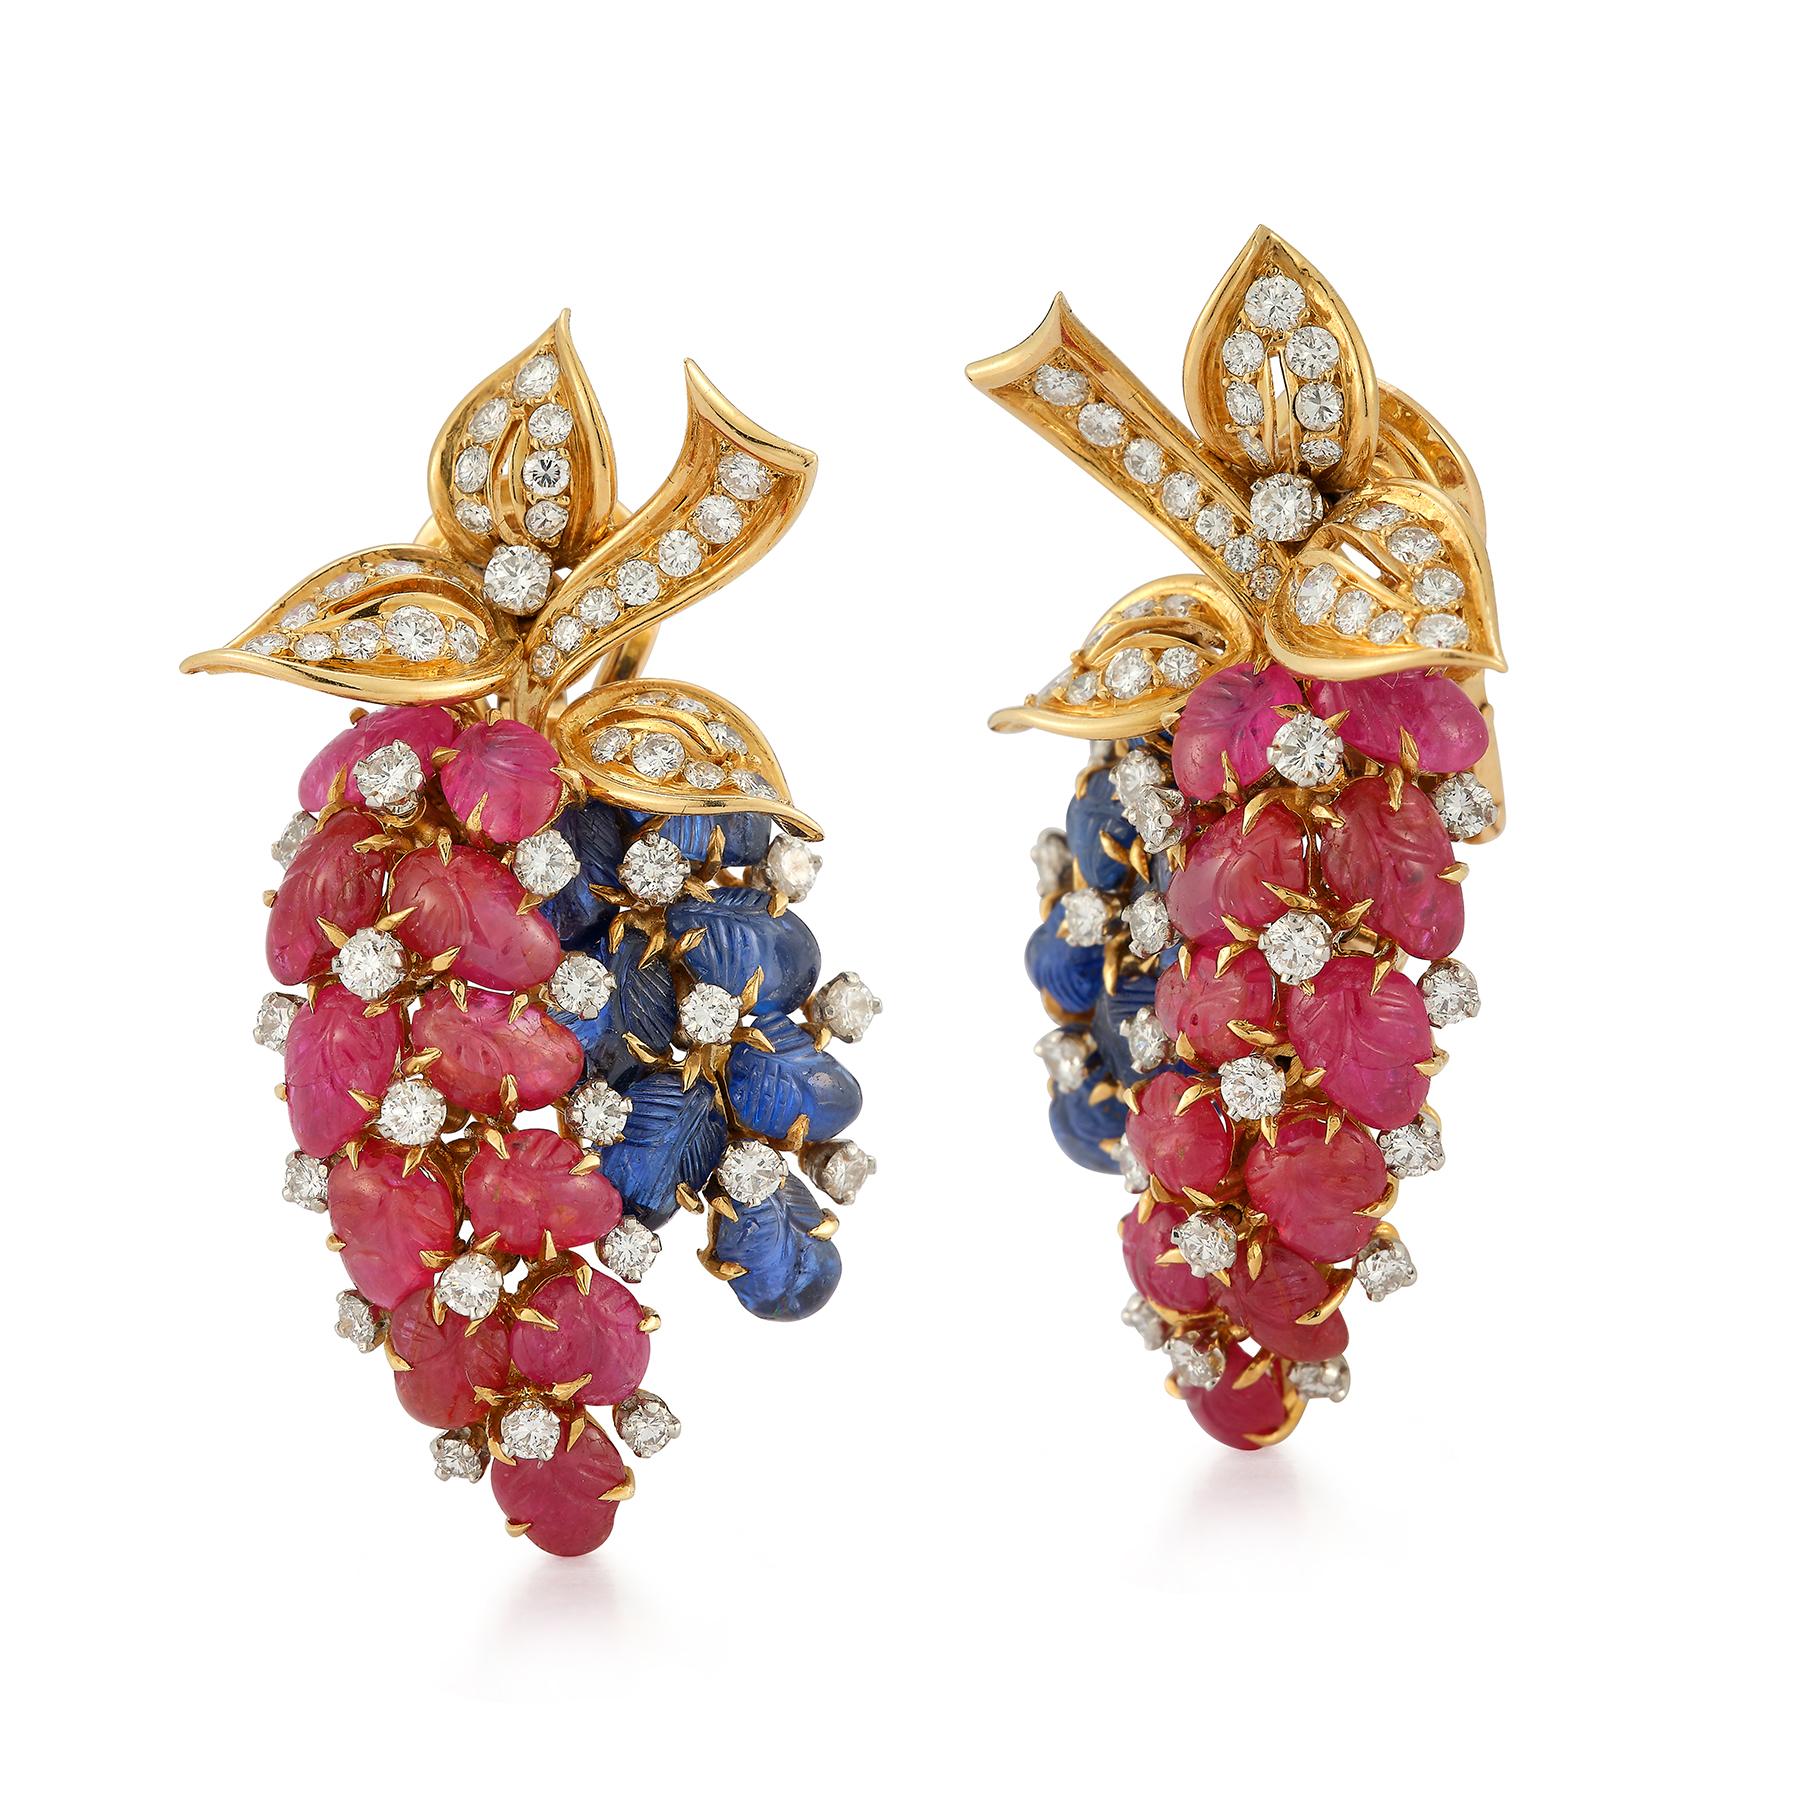 Tutti Frutti Earrings by Bulgari 

Carved rubies & sapphires with round cut diamonds set in 18k yellow gold.
Diamond Weight: approximately 1.10 cts

Back Type: clip on

Measurements: 1.5